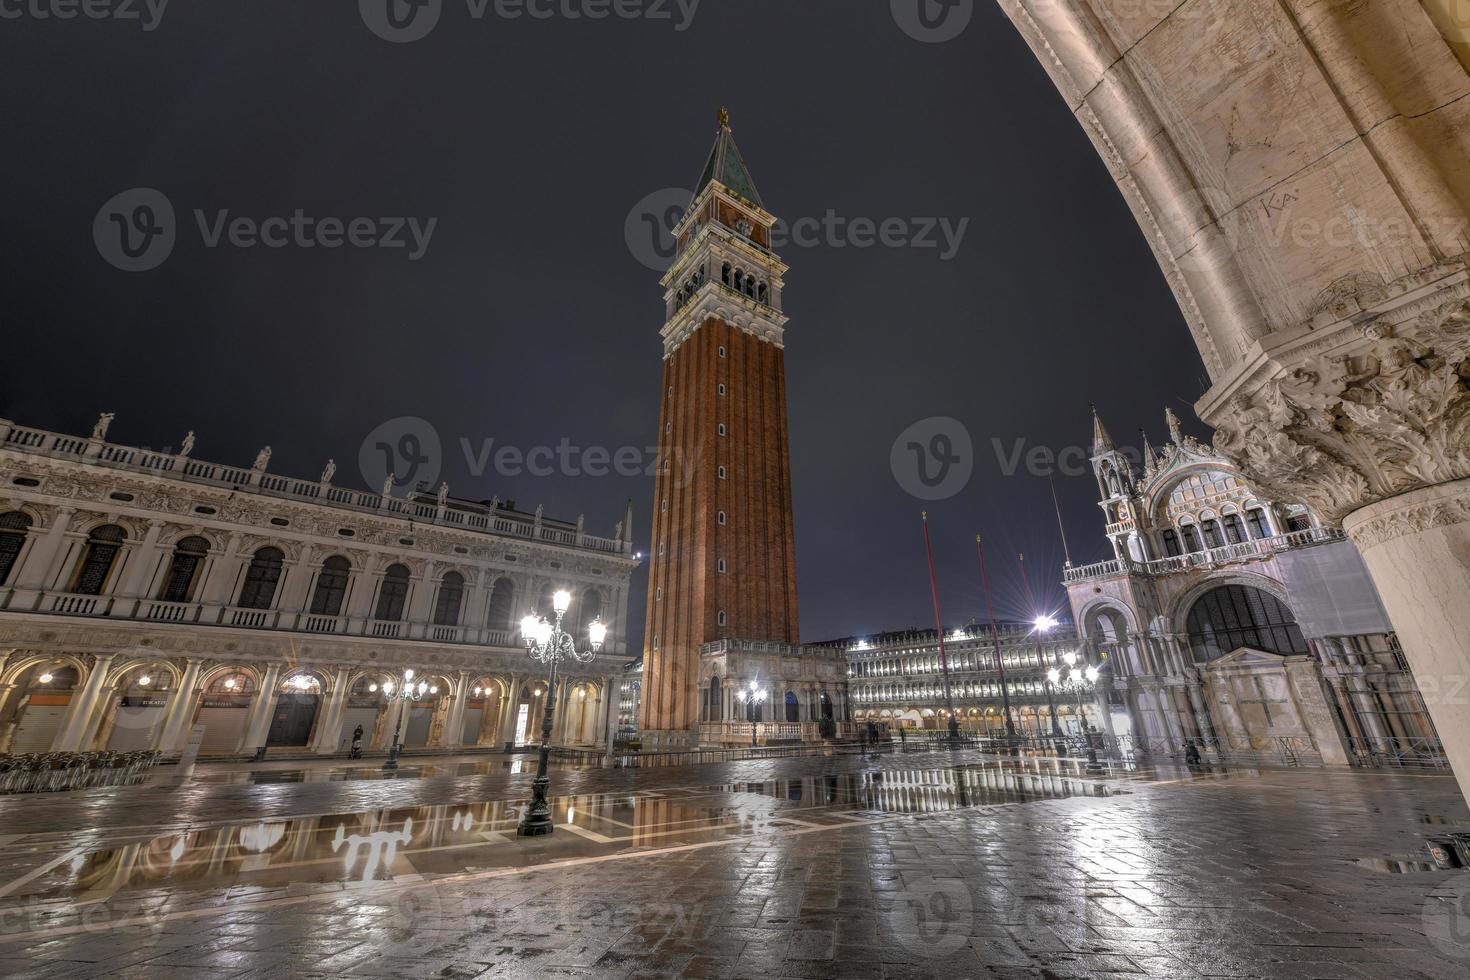 The bell tower in Saint Mark's Square in Venice, Italy at night. photo